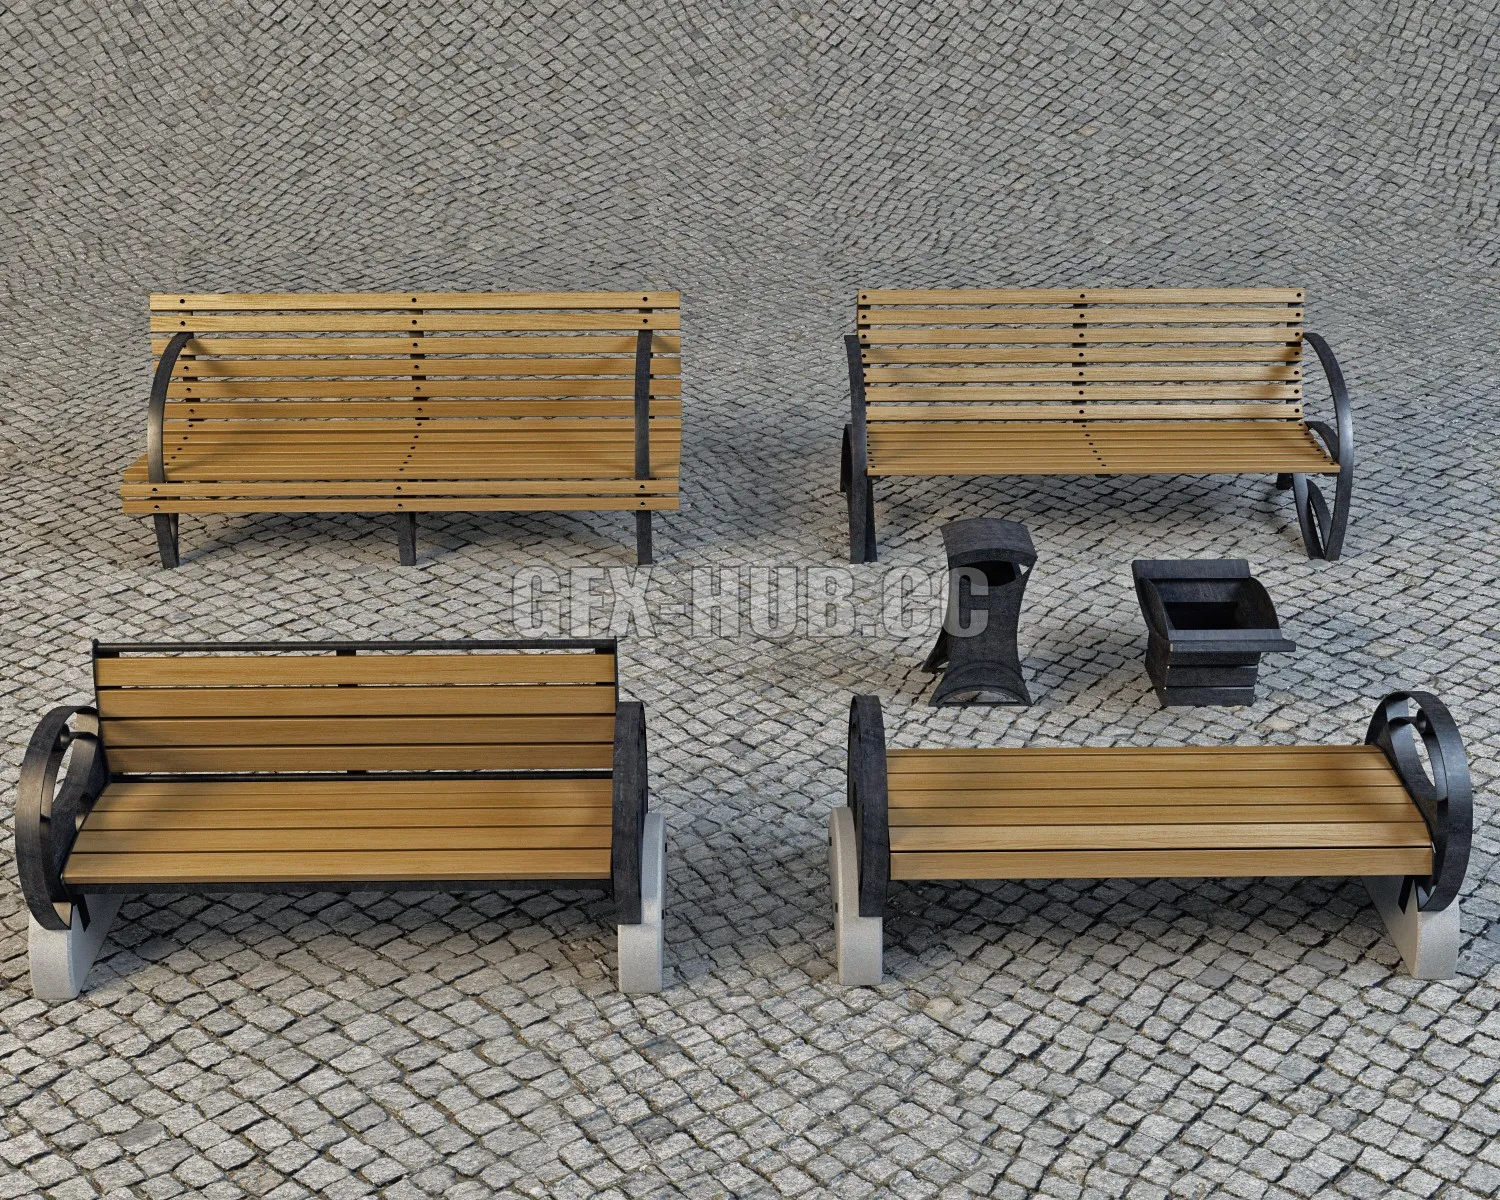 PRO MODELS – Benches and urns (4 models)